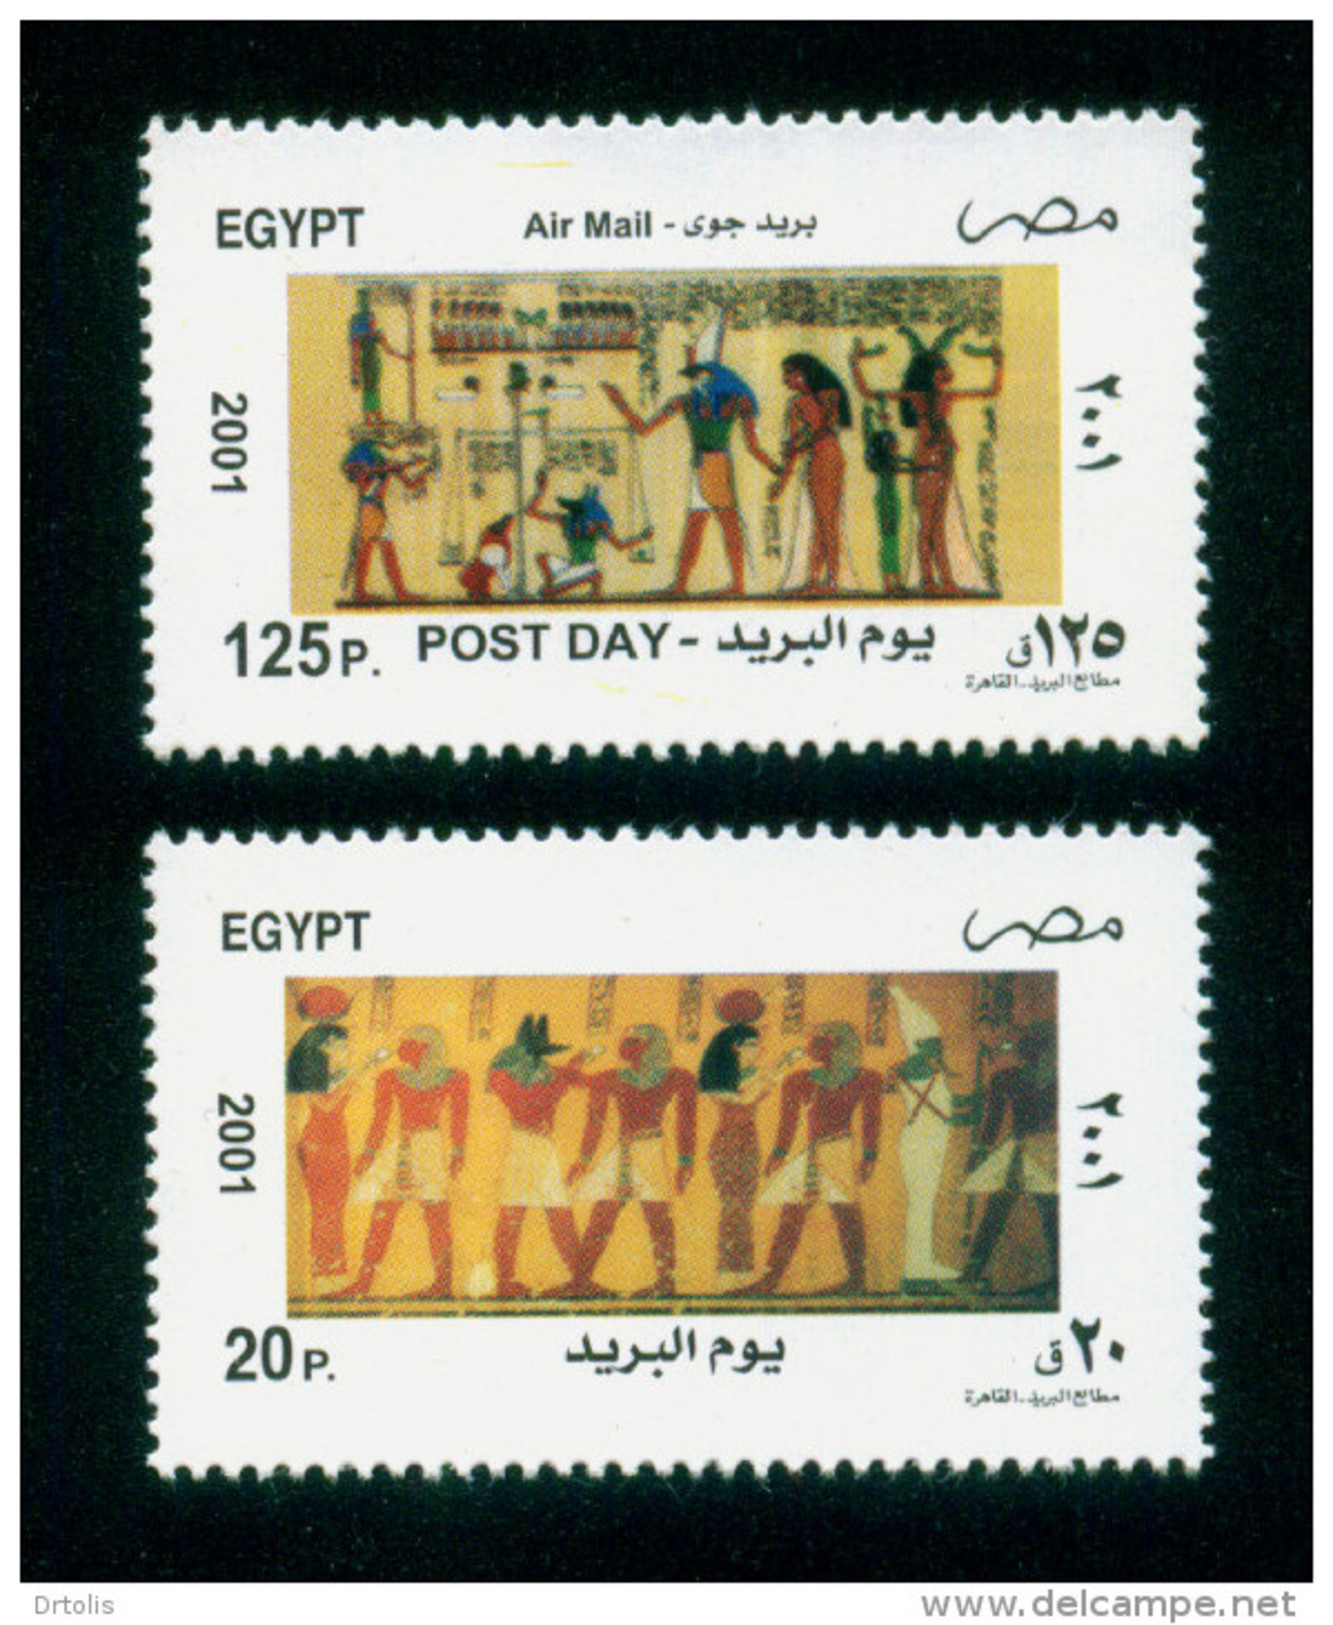 EGYPT / 2001 / POST DAY / EGYPTOLOGY / ANUBIS / MAAT / ISIS / WEIGHT & MEASURMENTS / MNH / VF - Unused Stamps